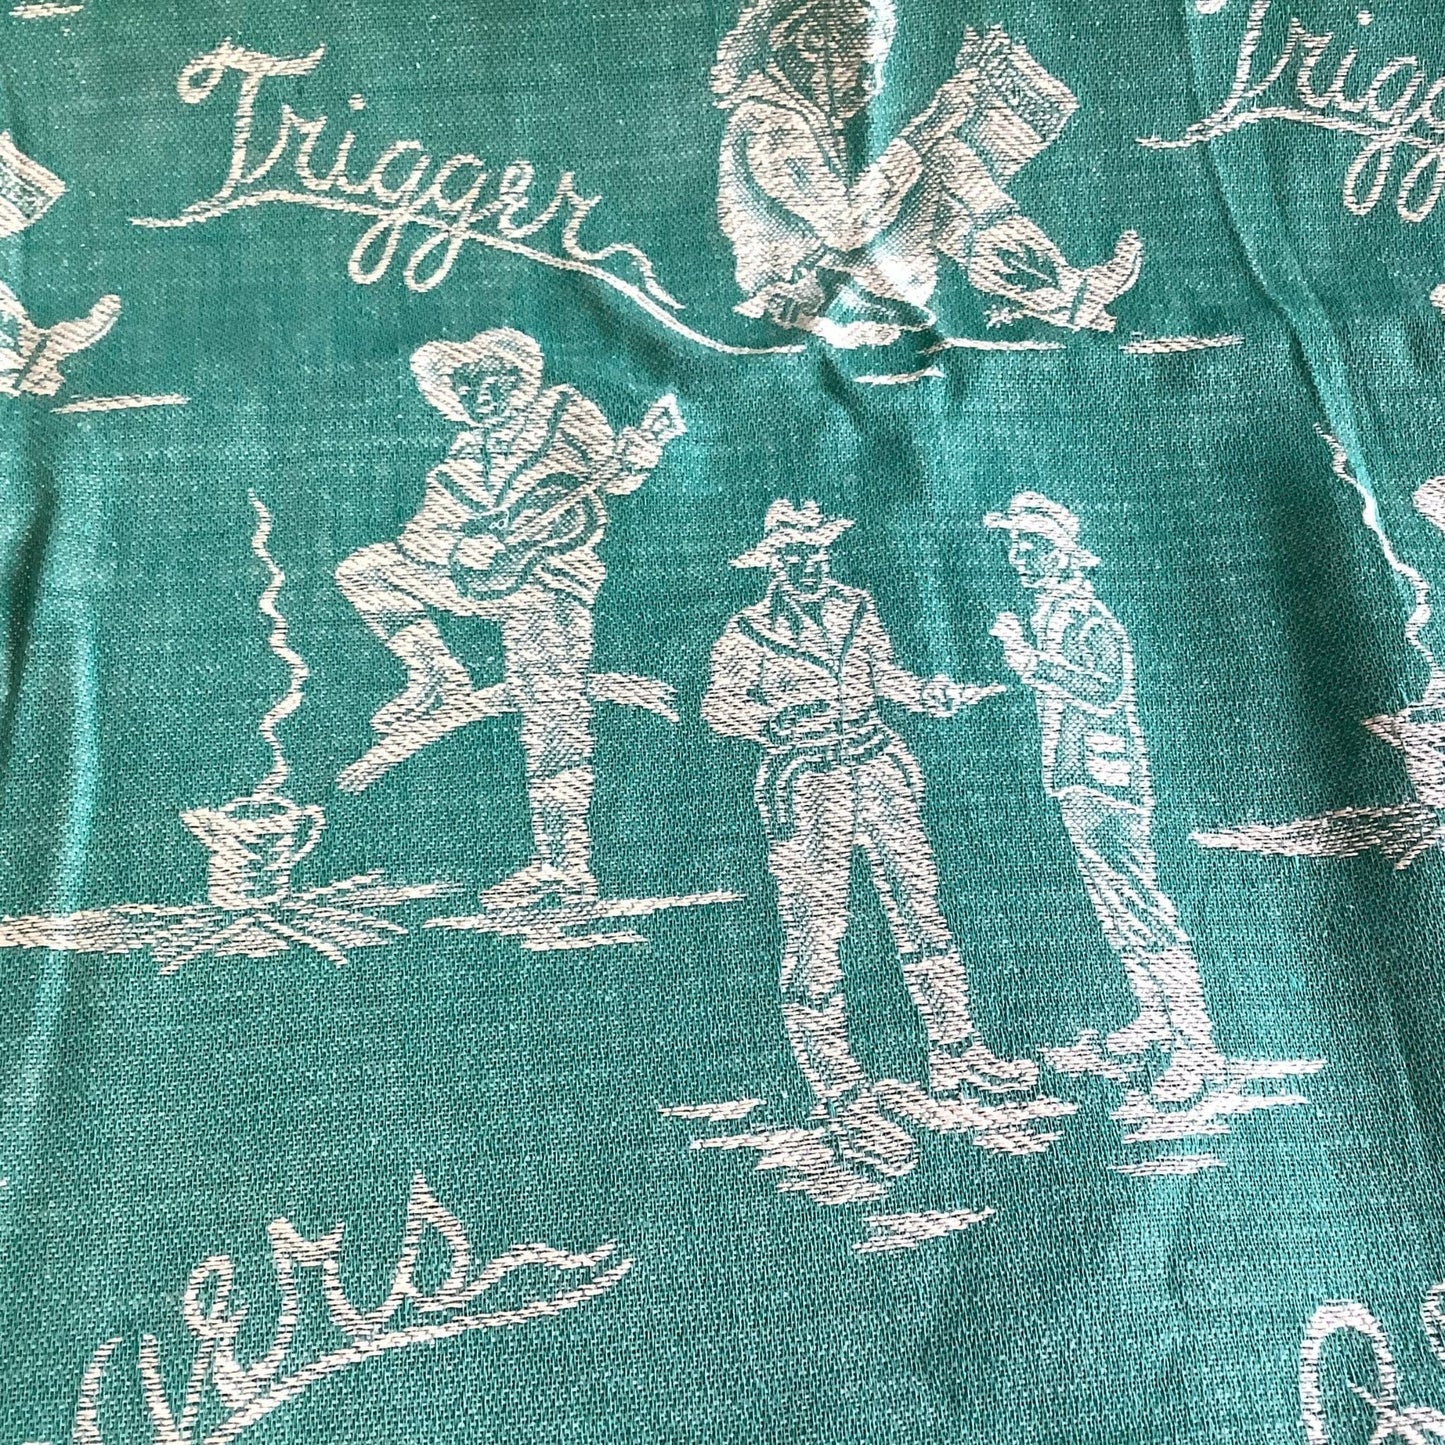 Roy Rogers Themed Bedspread Multi / Cotton / Vintage 1950s